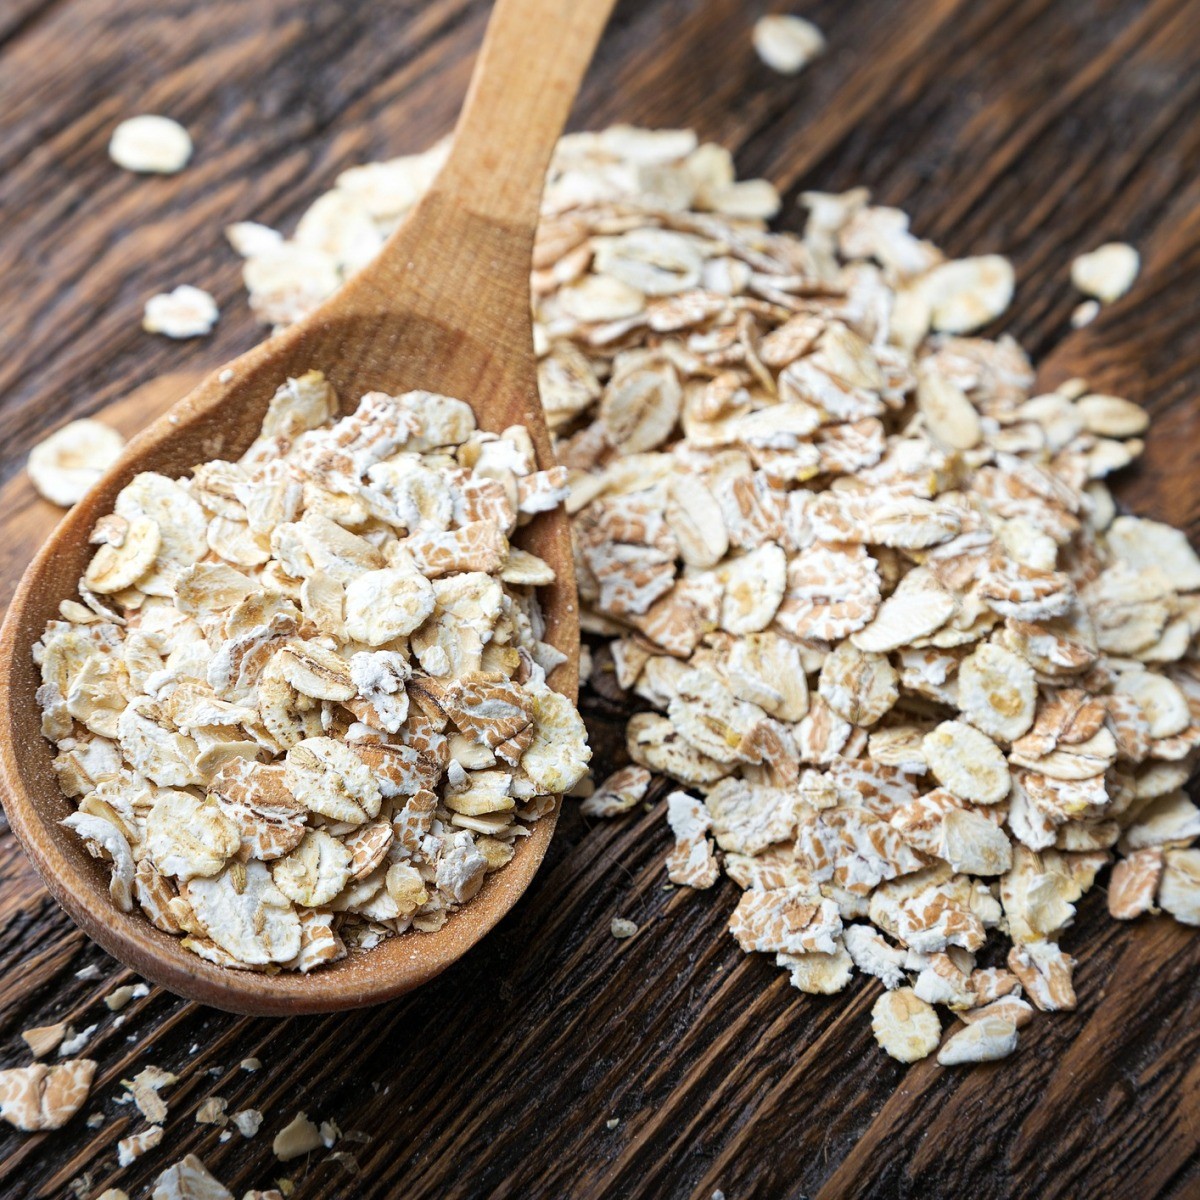 Is oatmeal good for diabetic dogs?